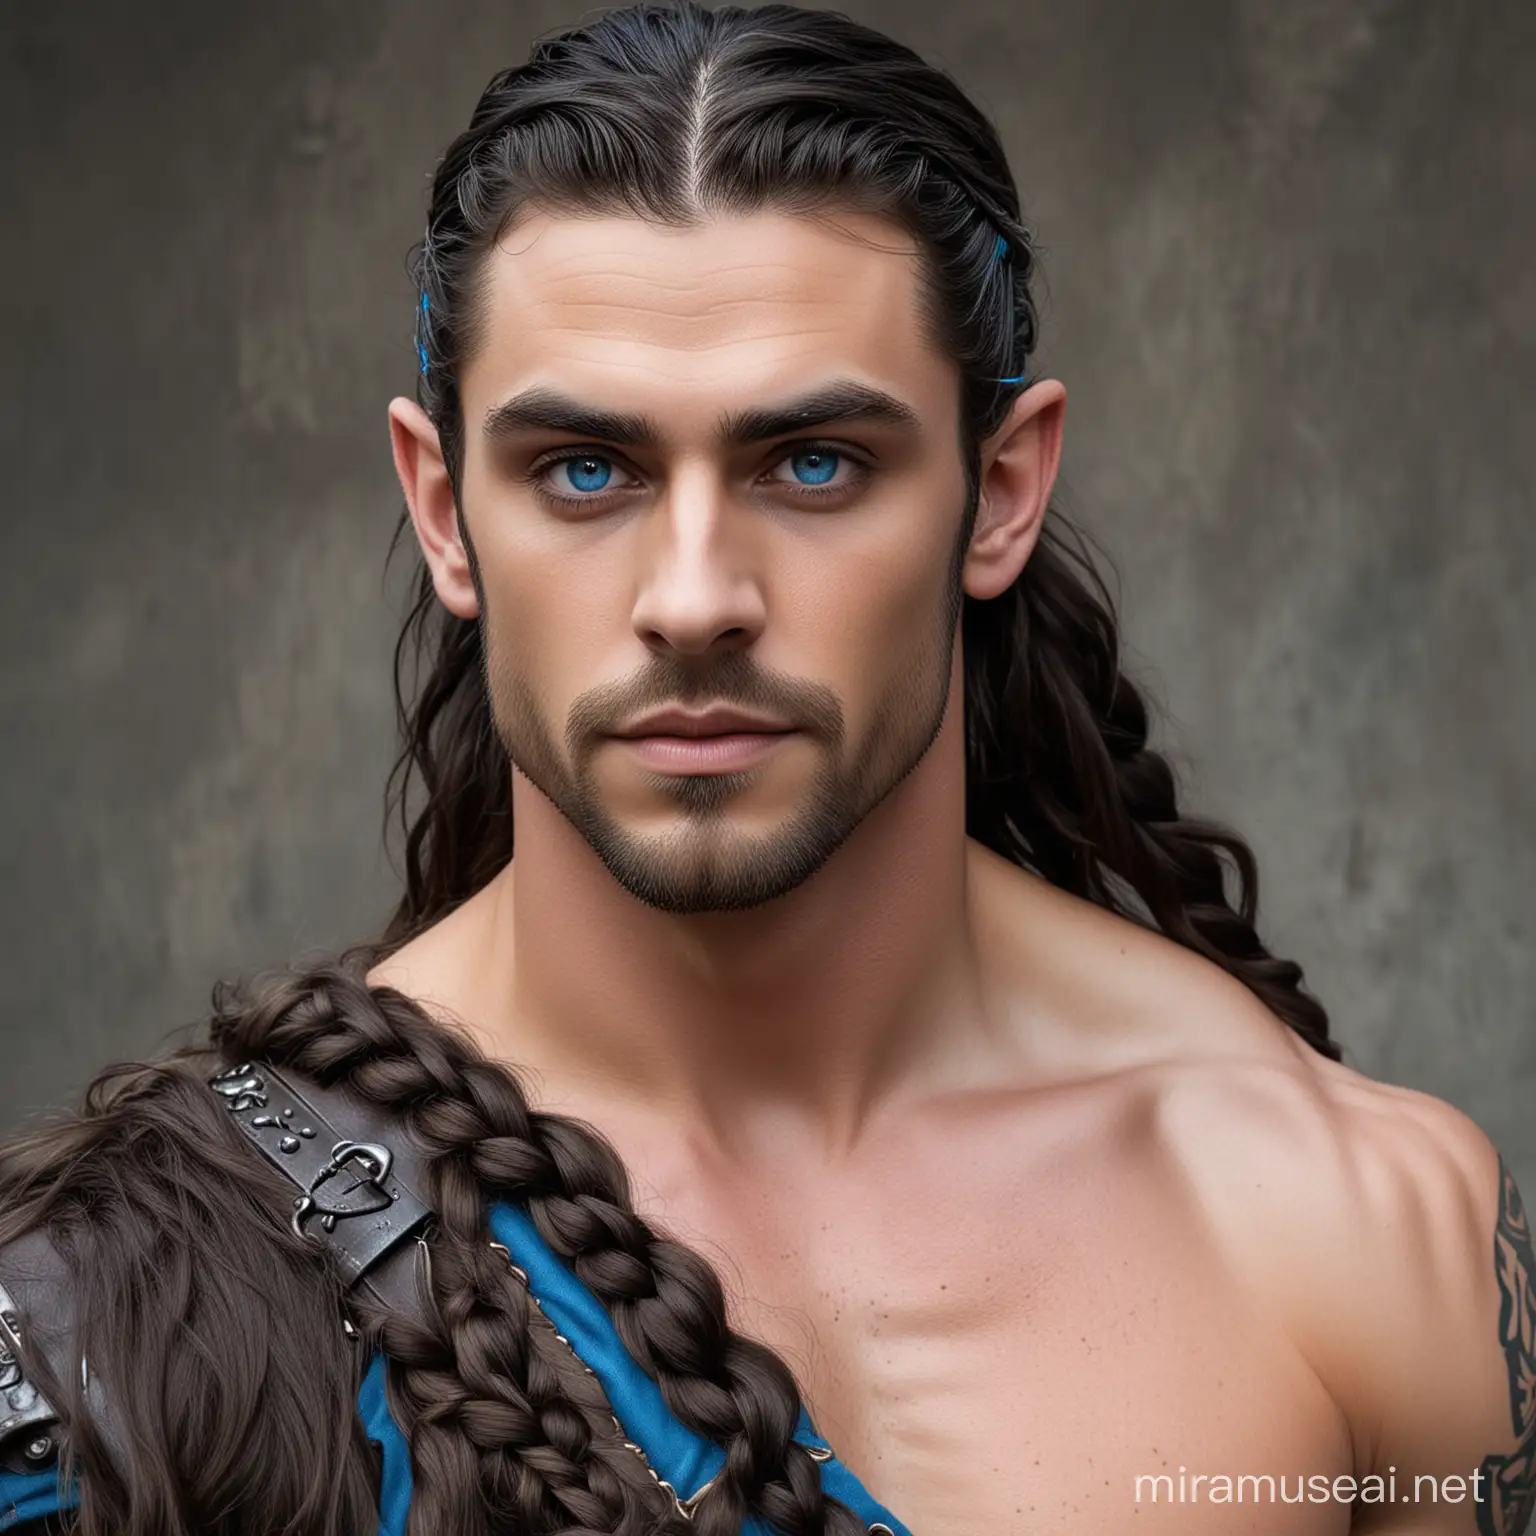 Majestic DarkHaired Elf with Braided Hair and Bright Blue Eyes